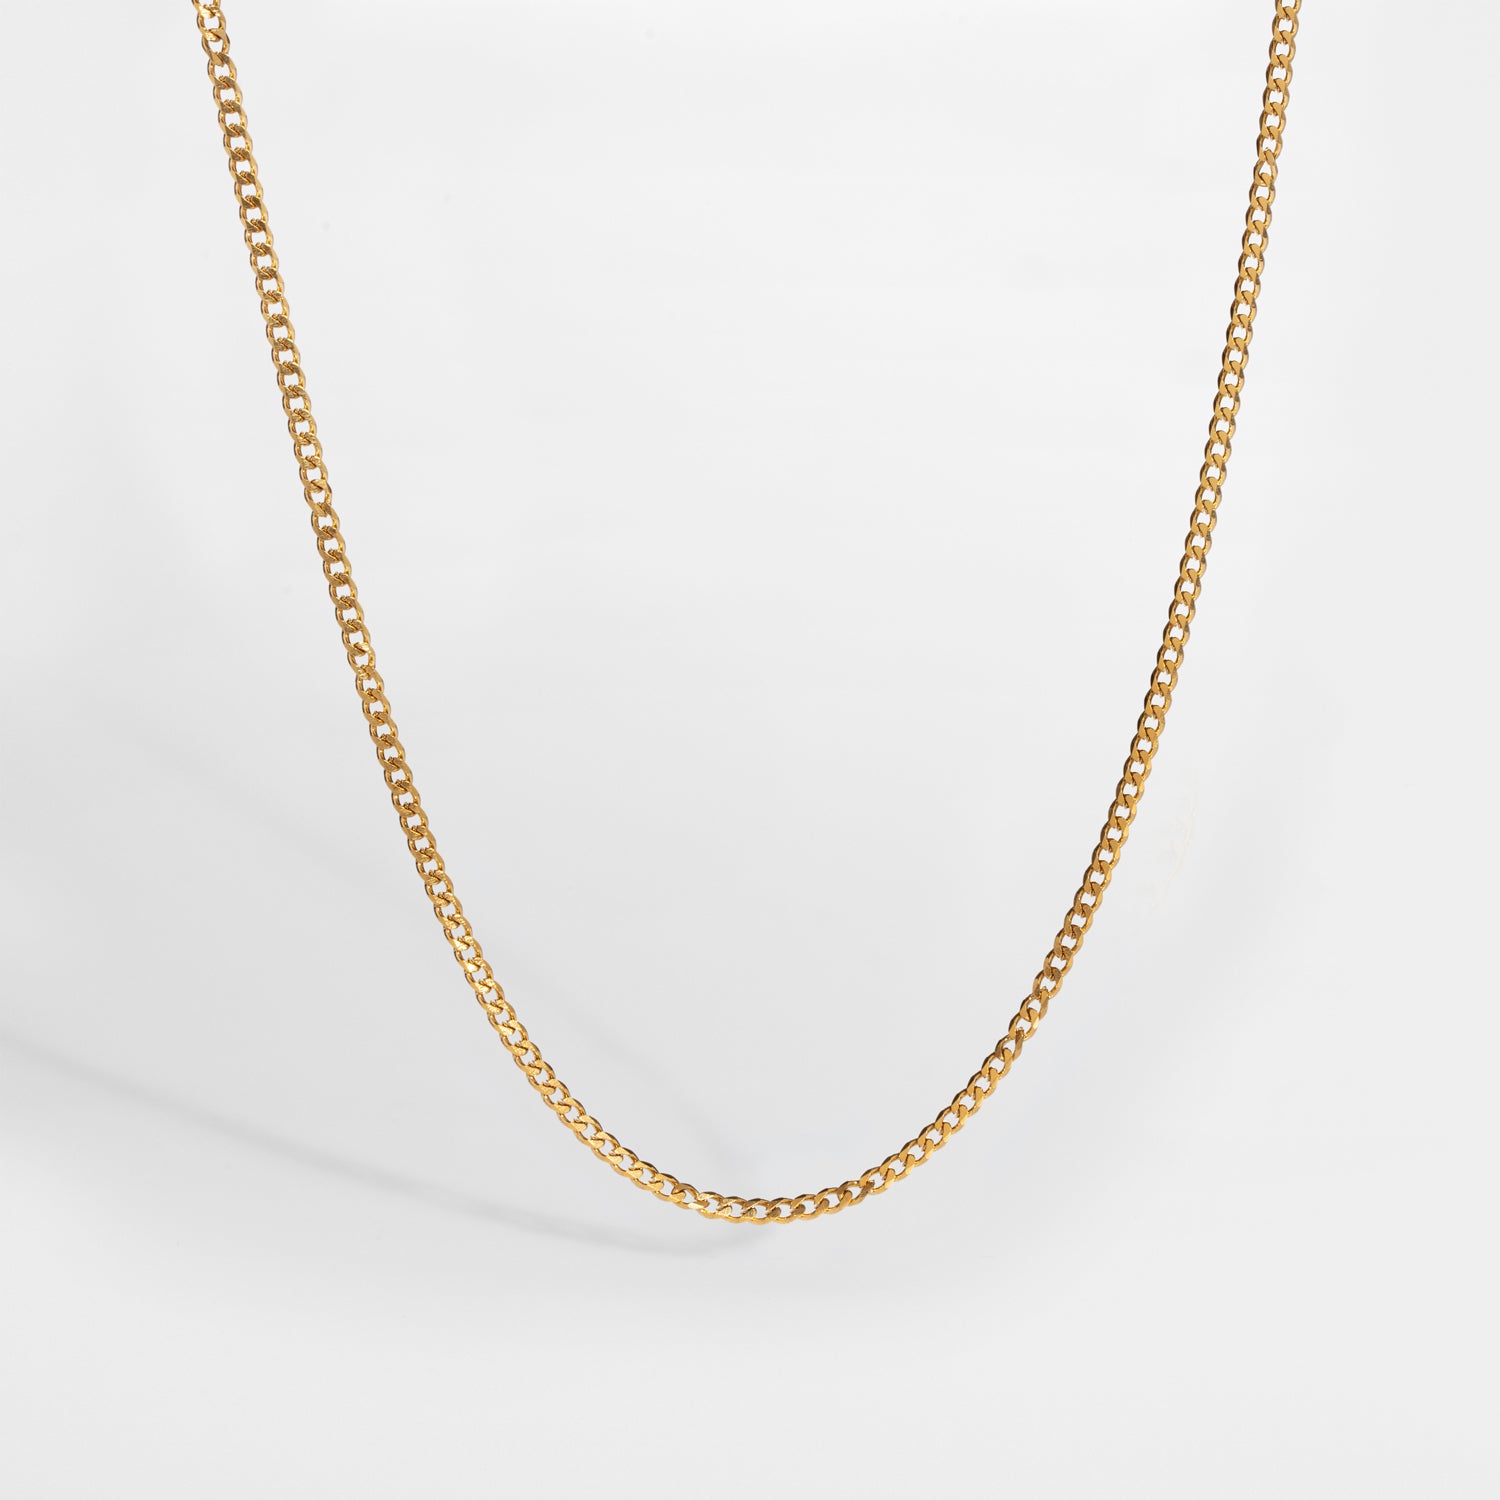 NL Minimal Sequence necklace - Gold-toned